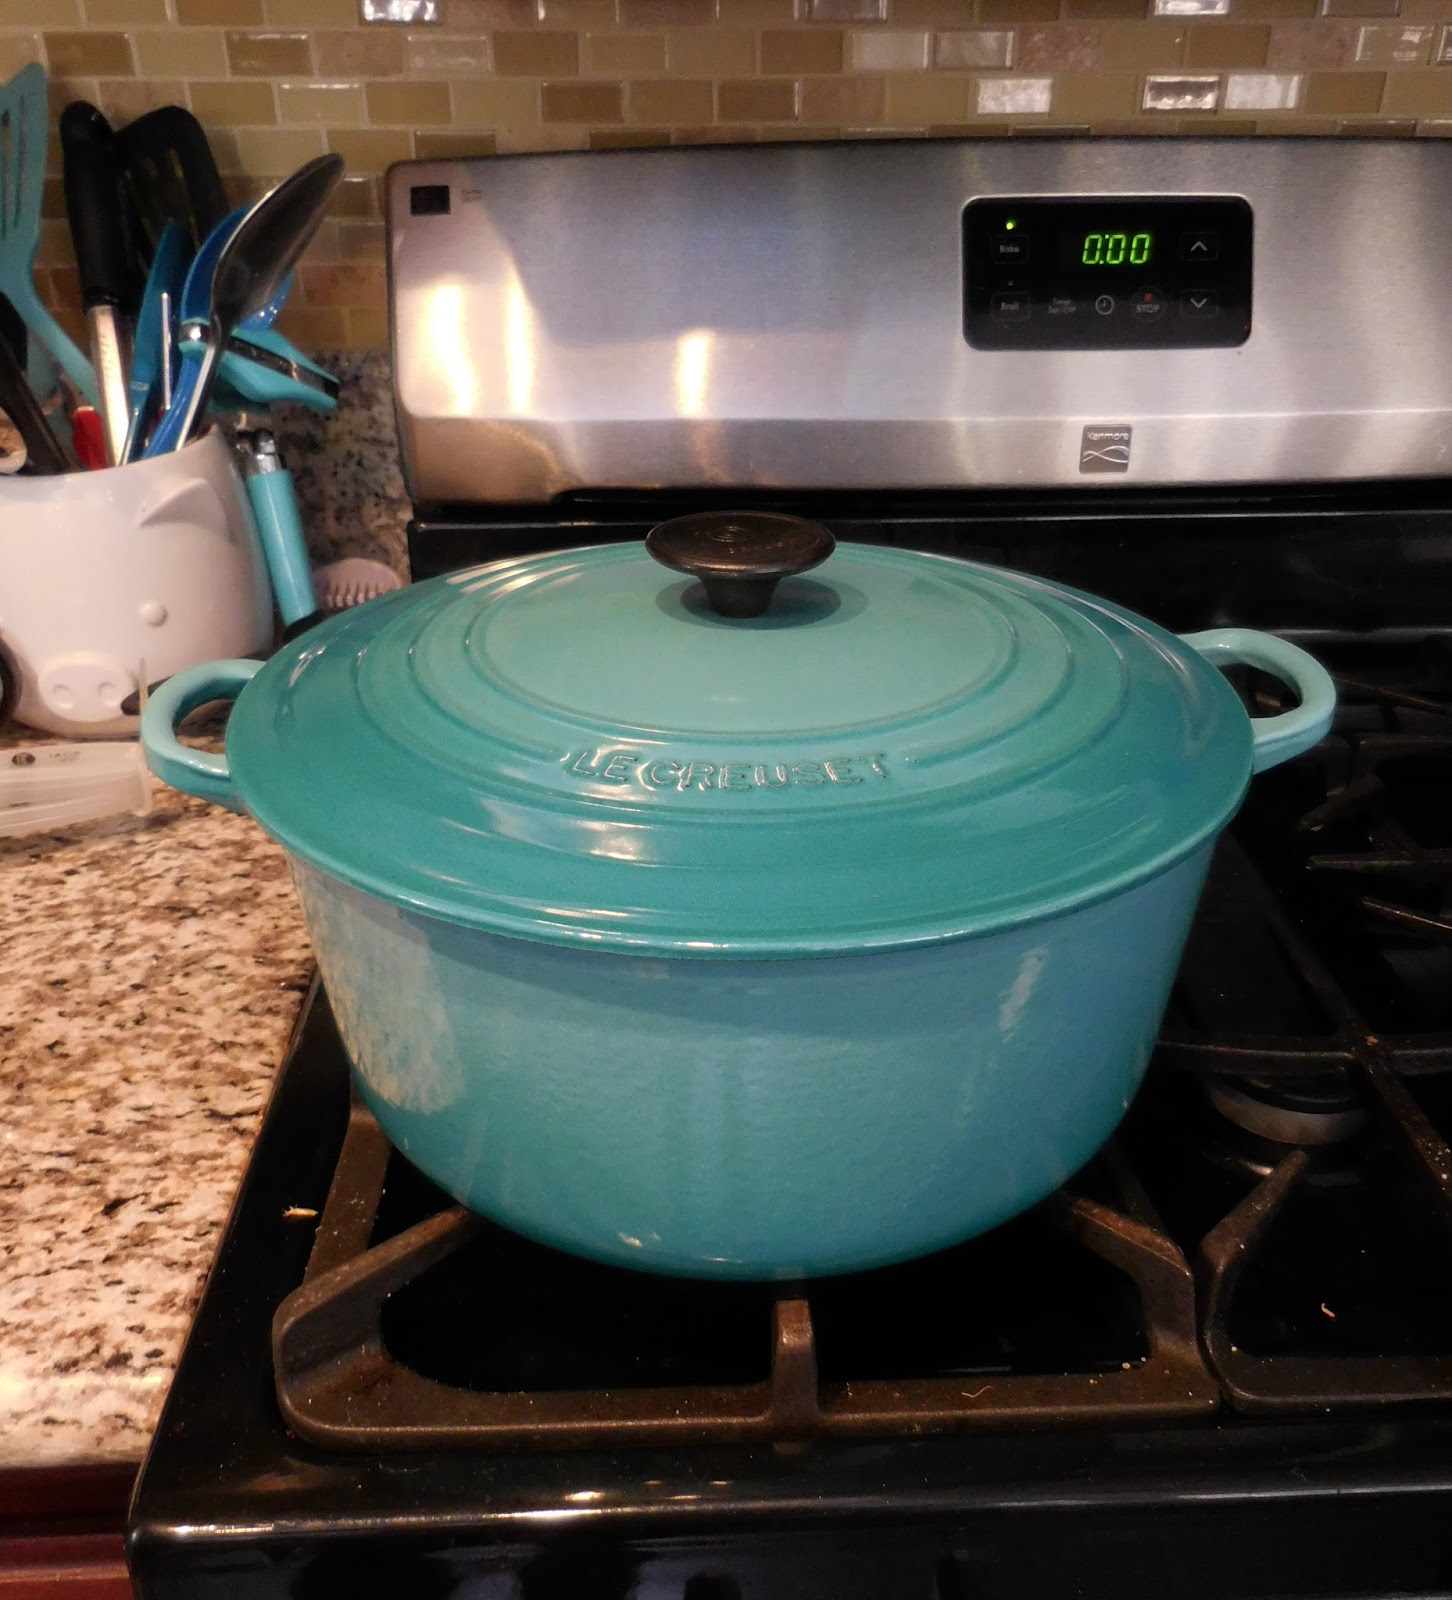 Three minutes of me rambling about Dutch ovens and enameled cast